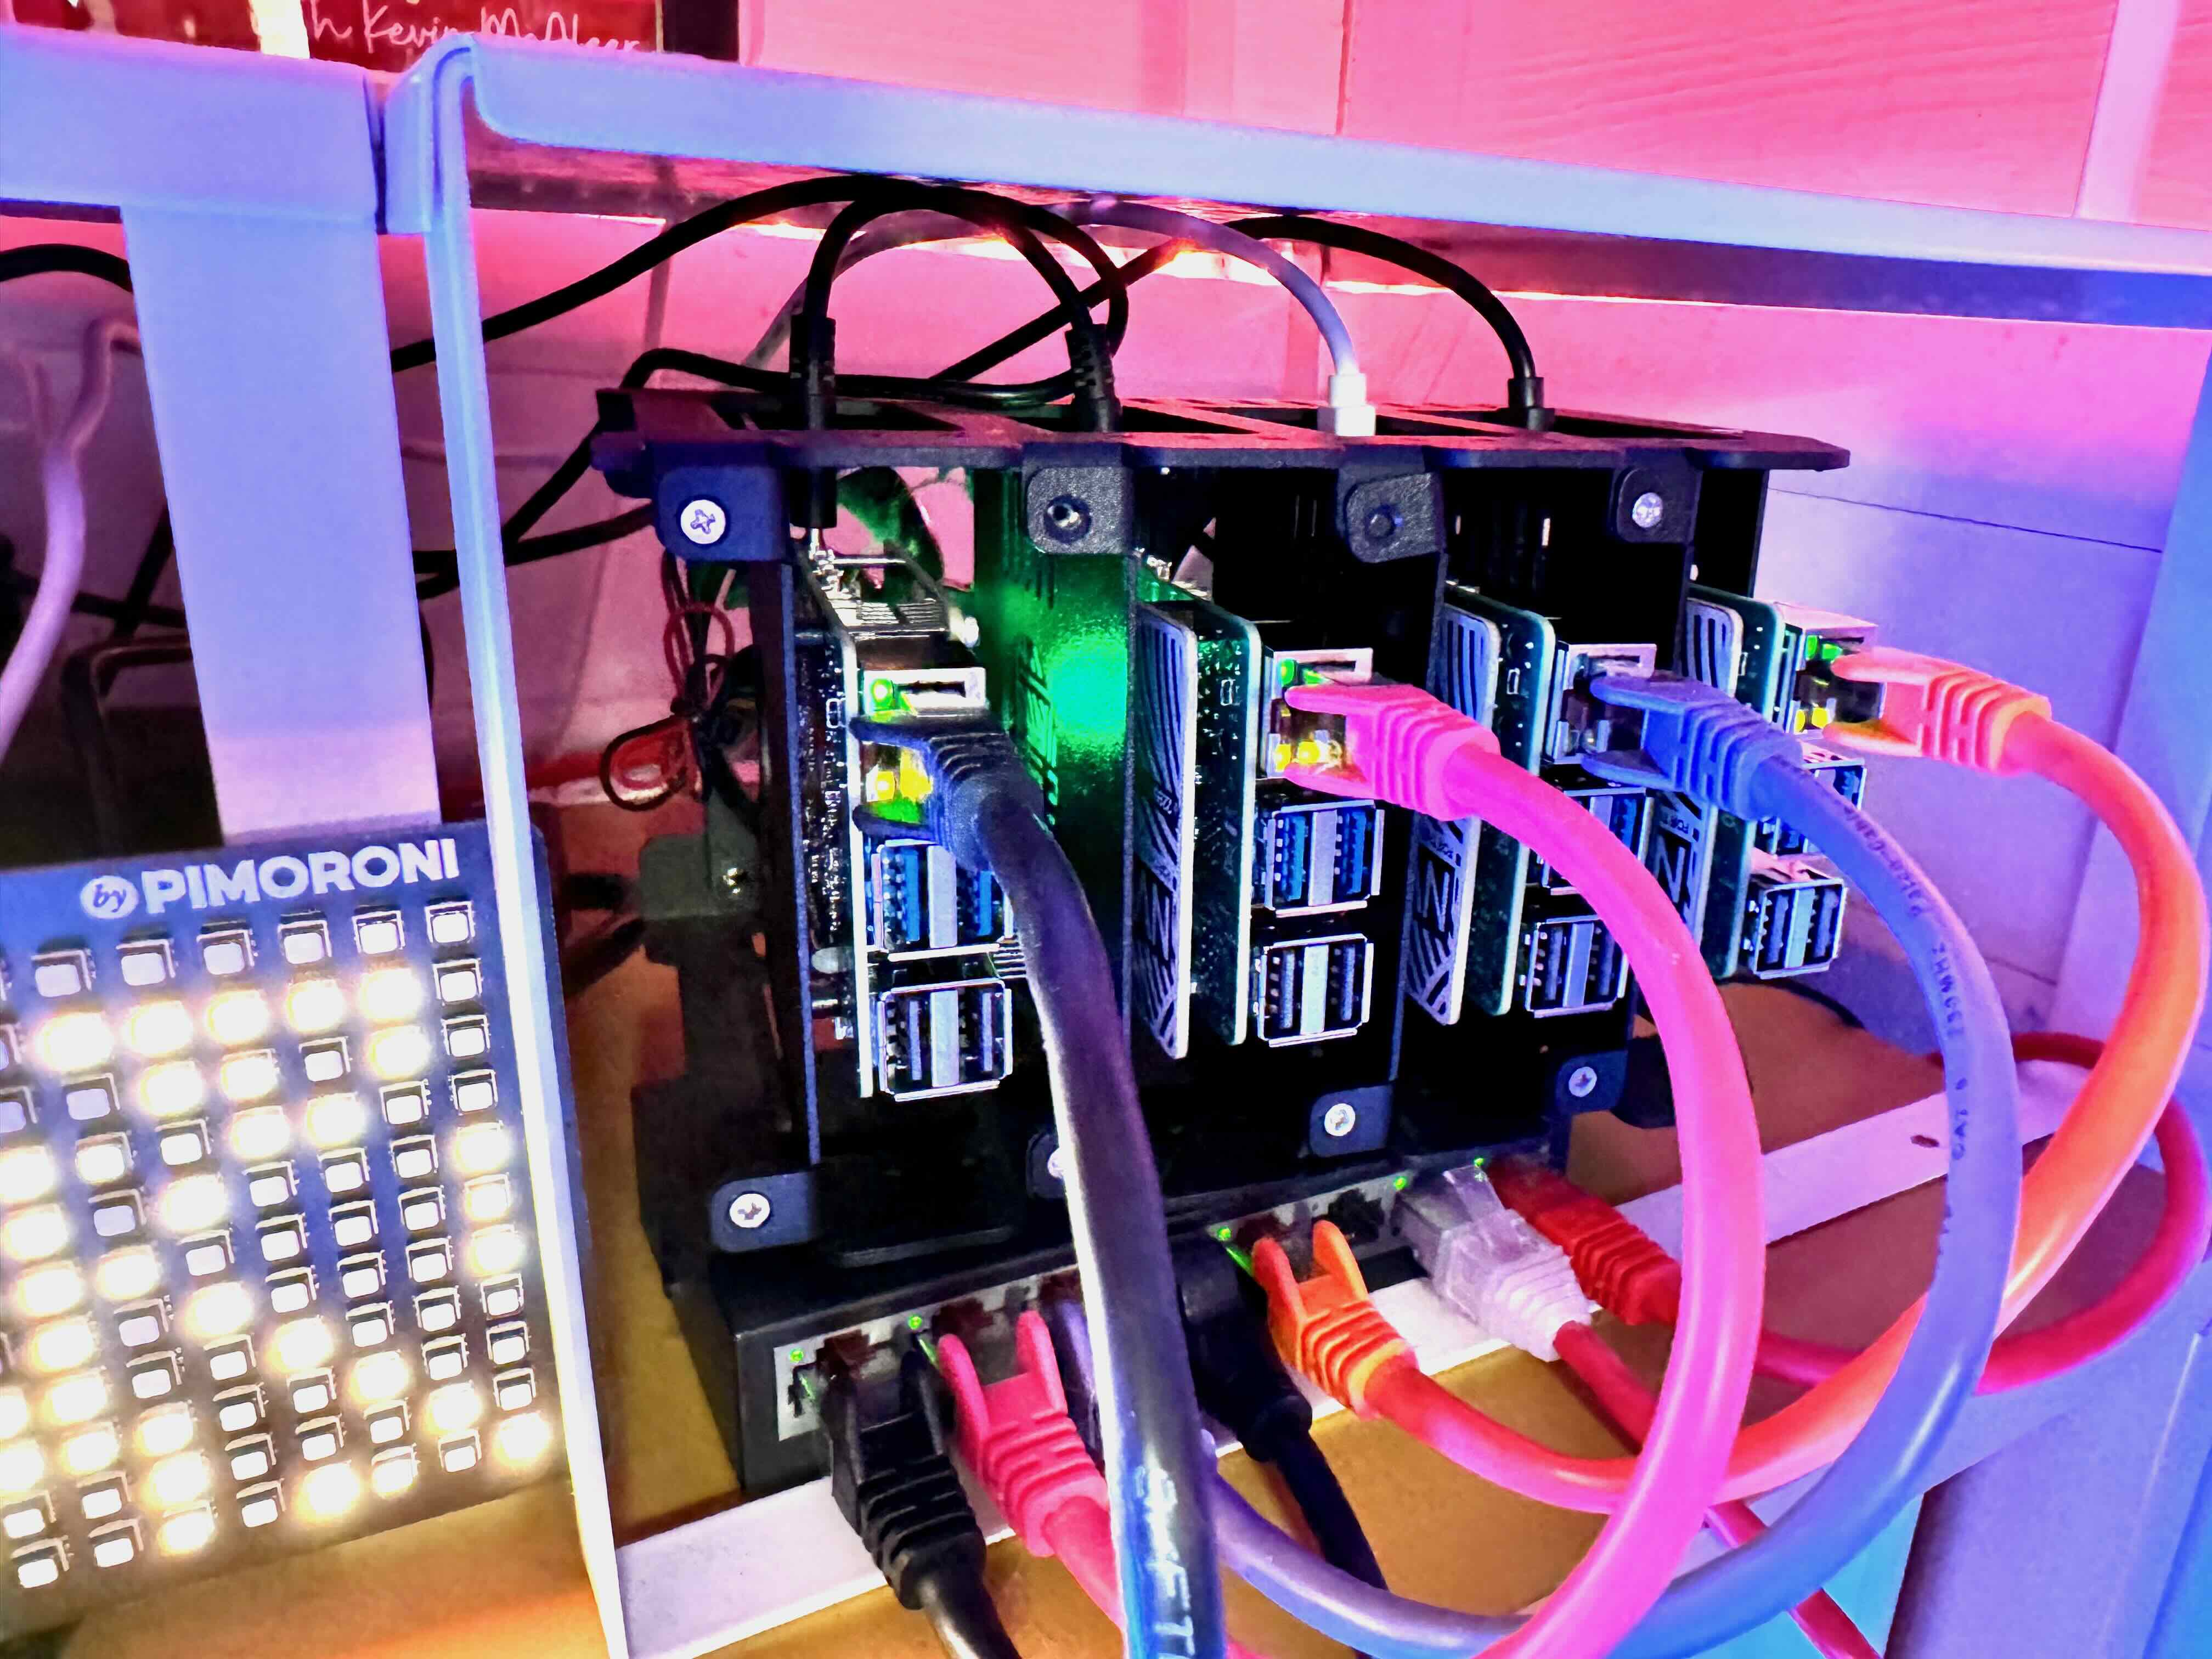 A cluster of 4 Raspberry Pi 5s with cables connected to a switch